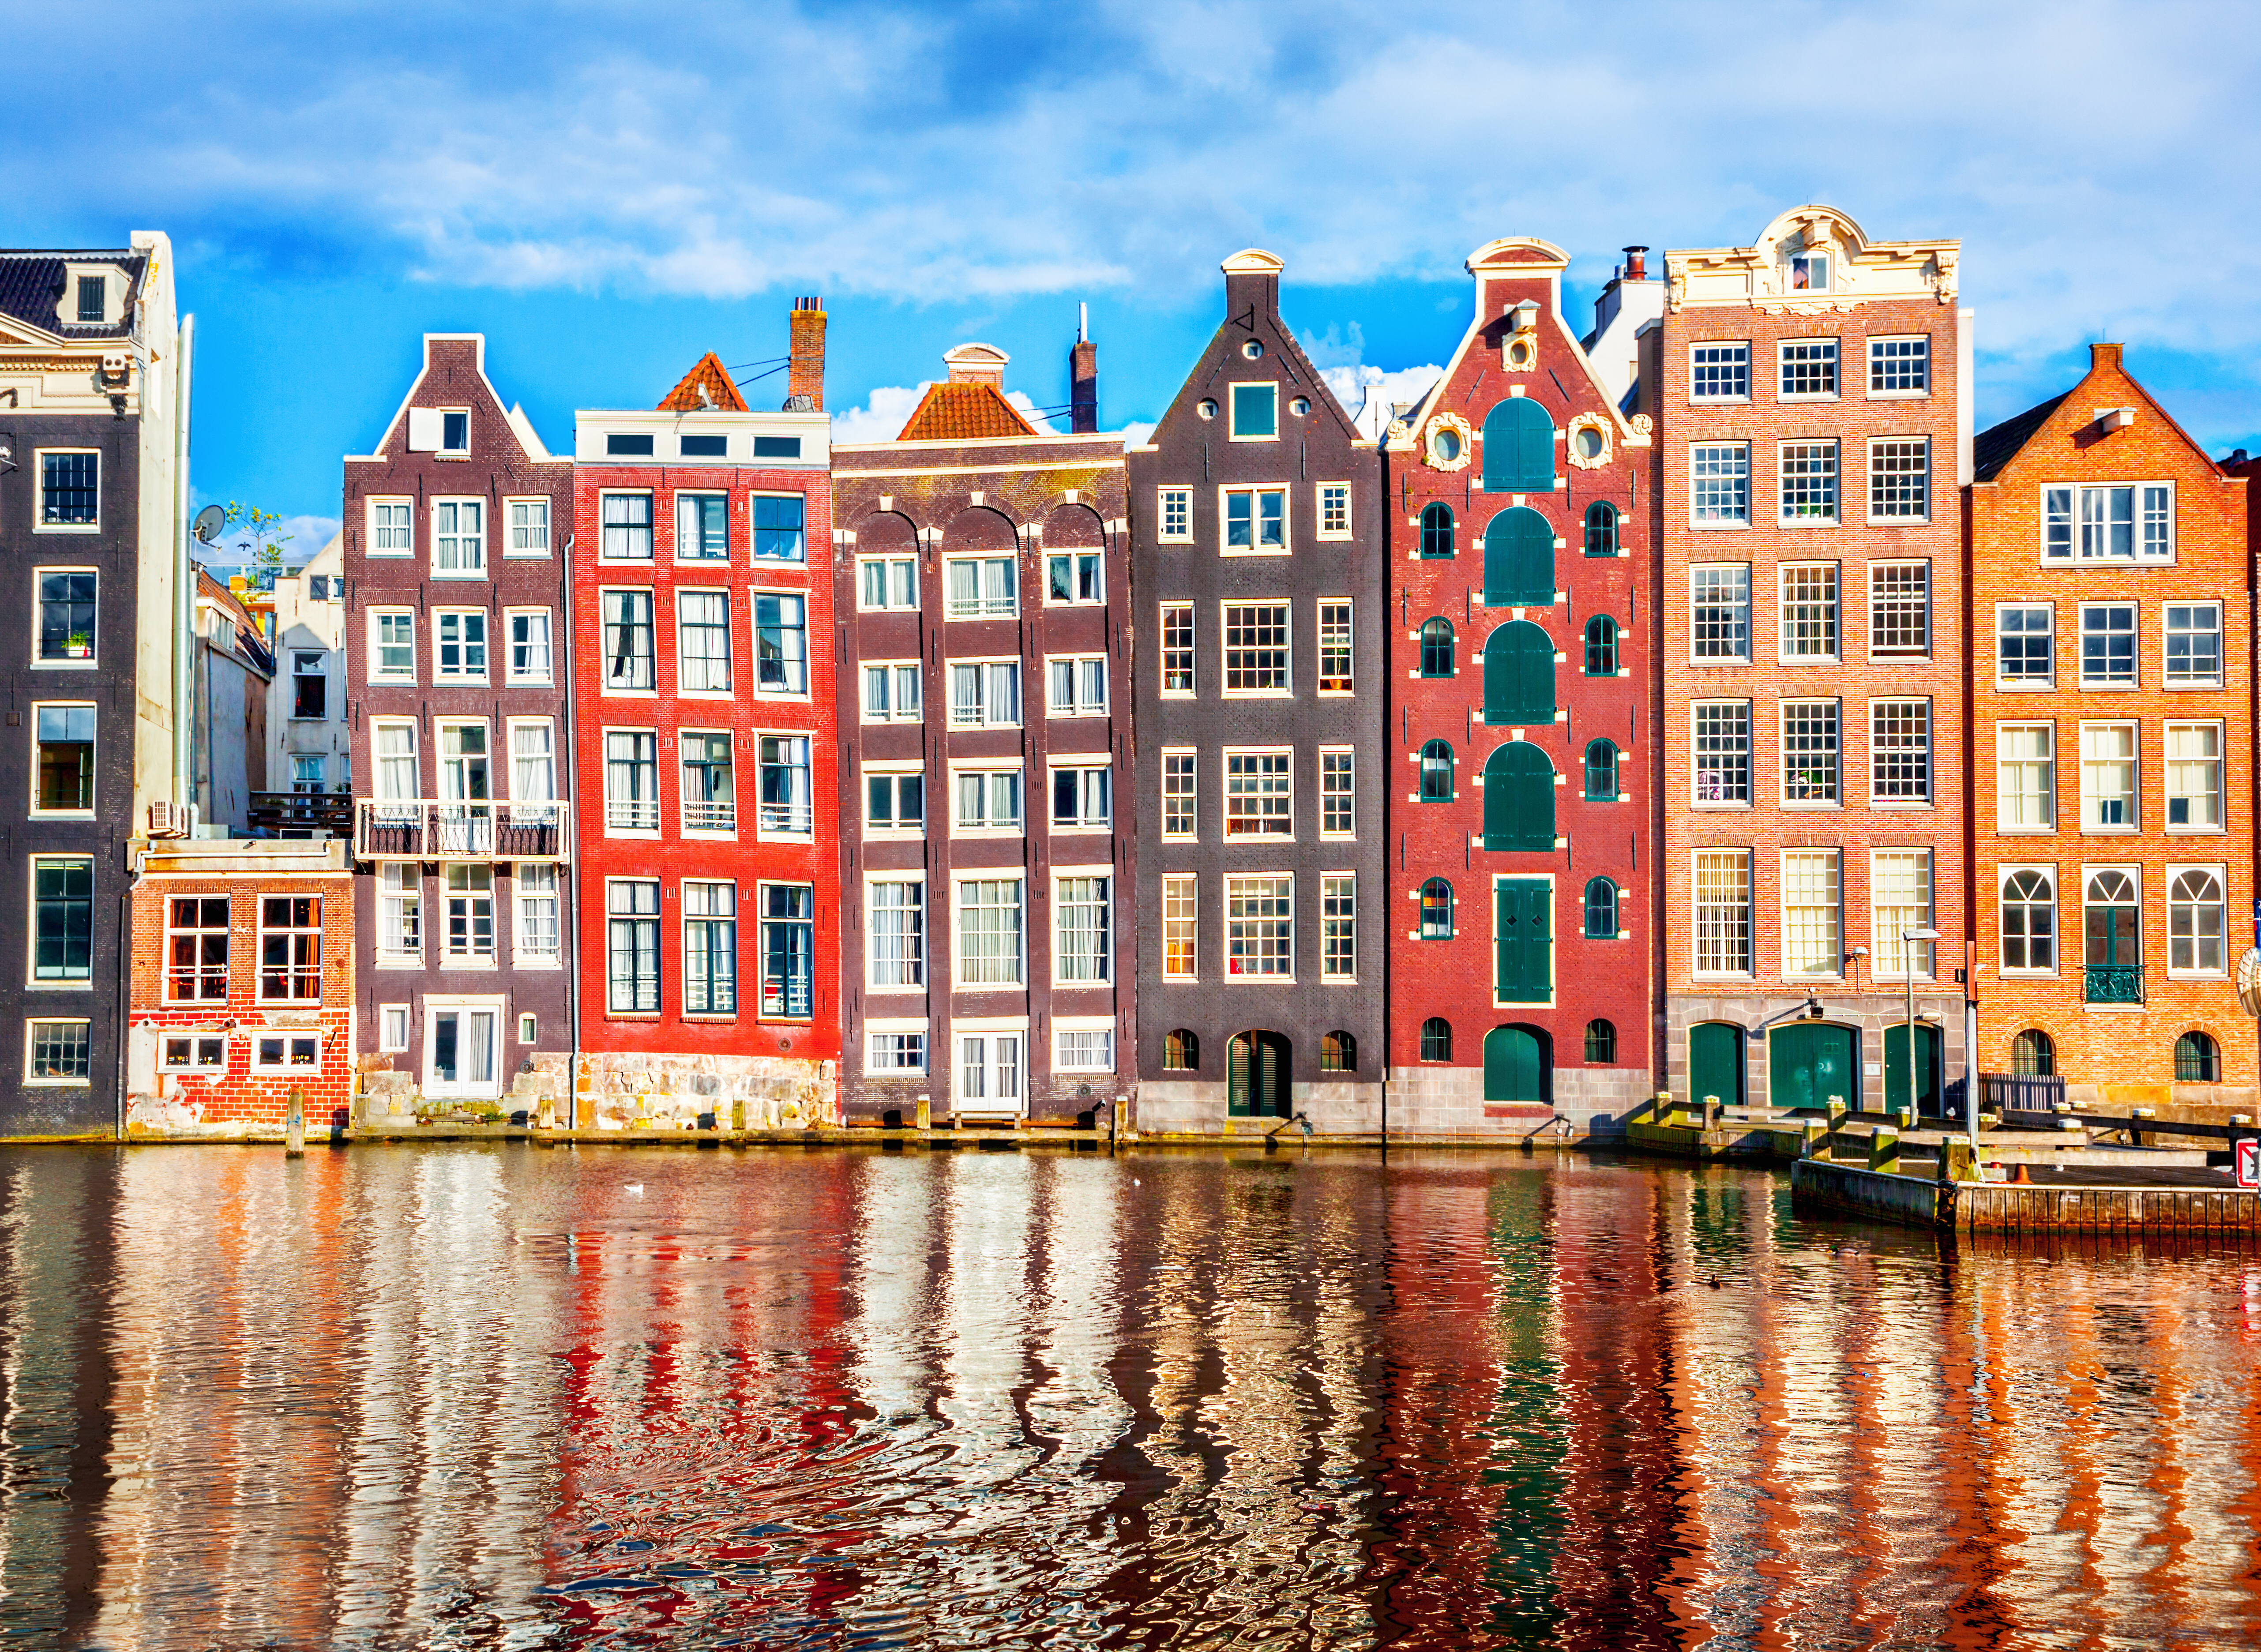 Ready for a quirky visit of Amsterdam? Along this tour you will discover some of the city's most original houses!